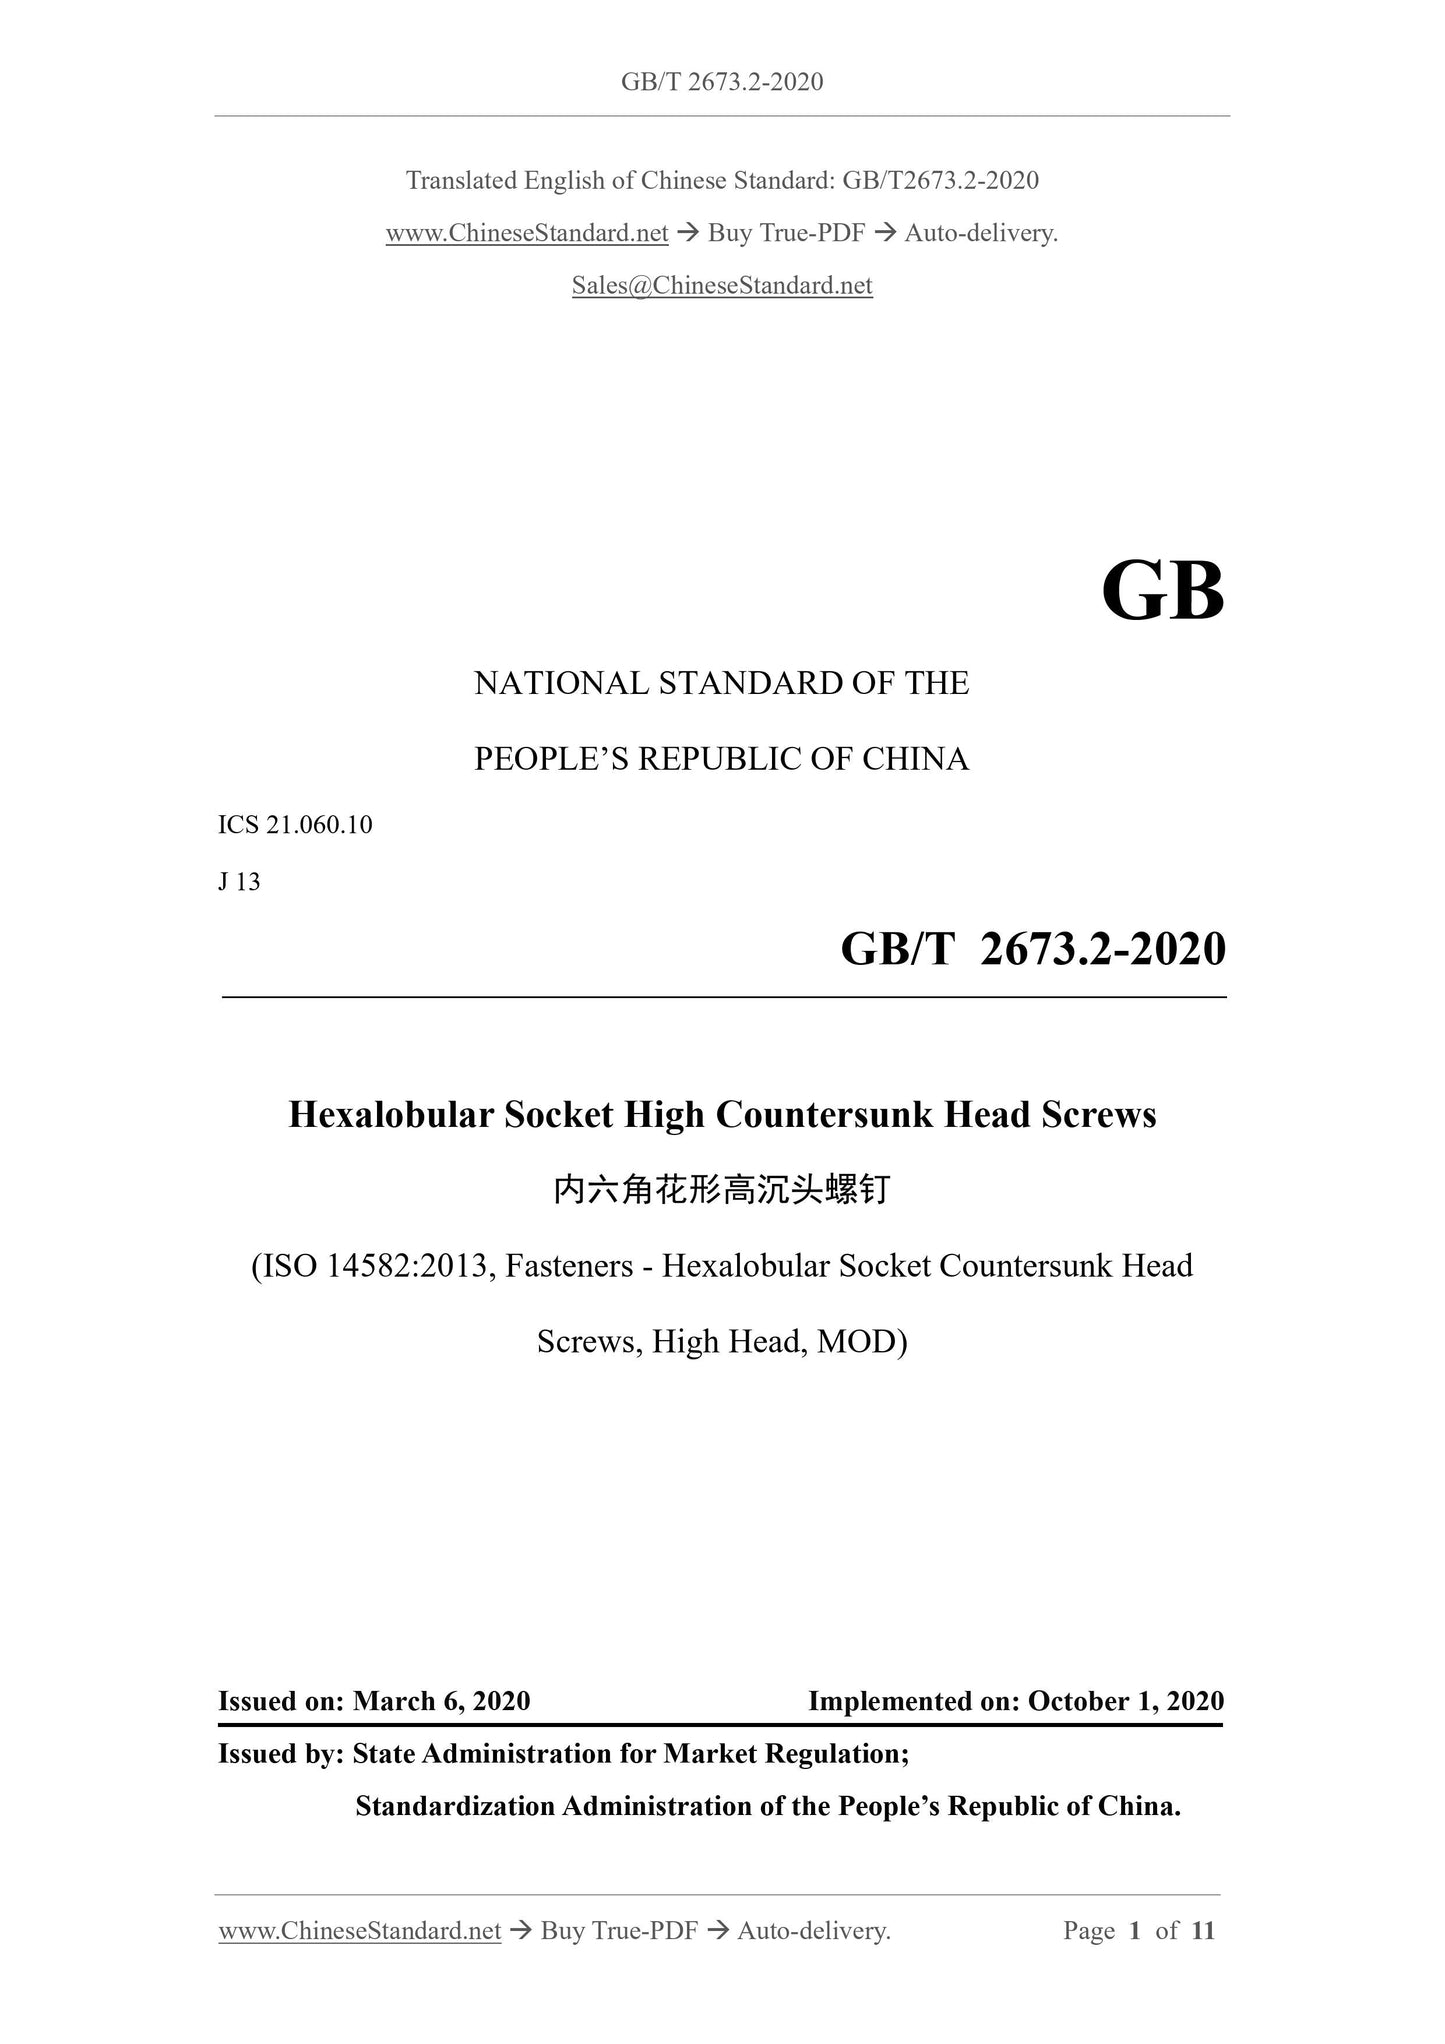 GB/T 2673.2-2020 Page 1